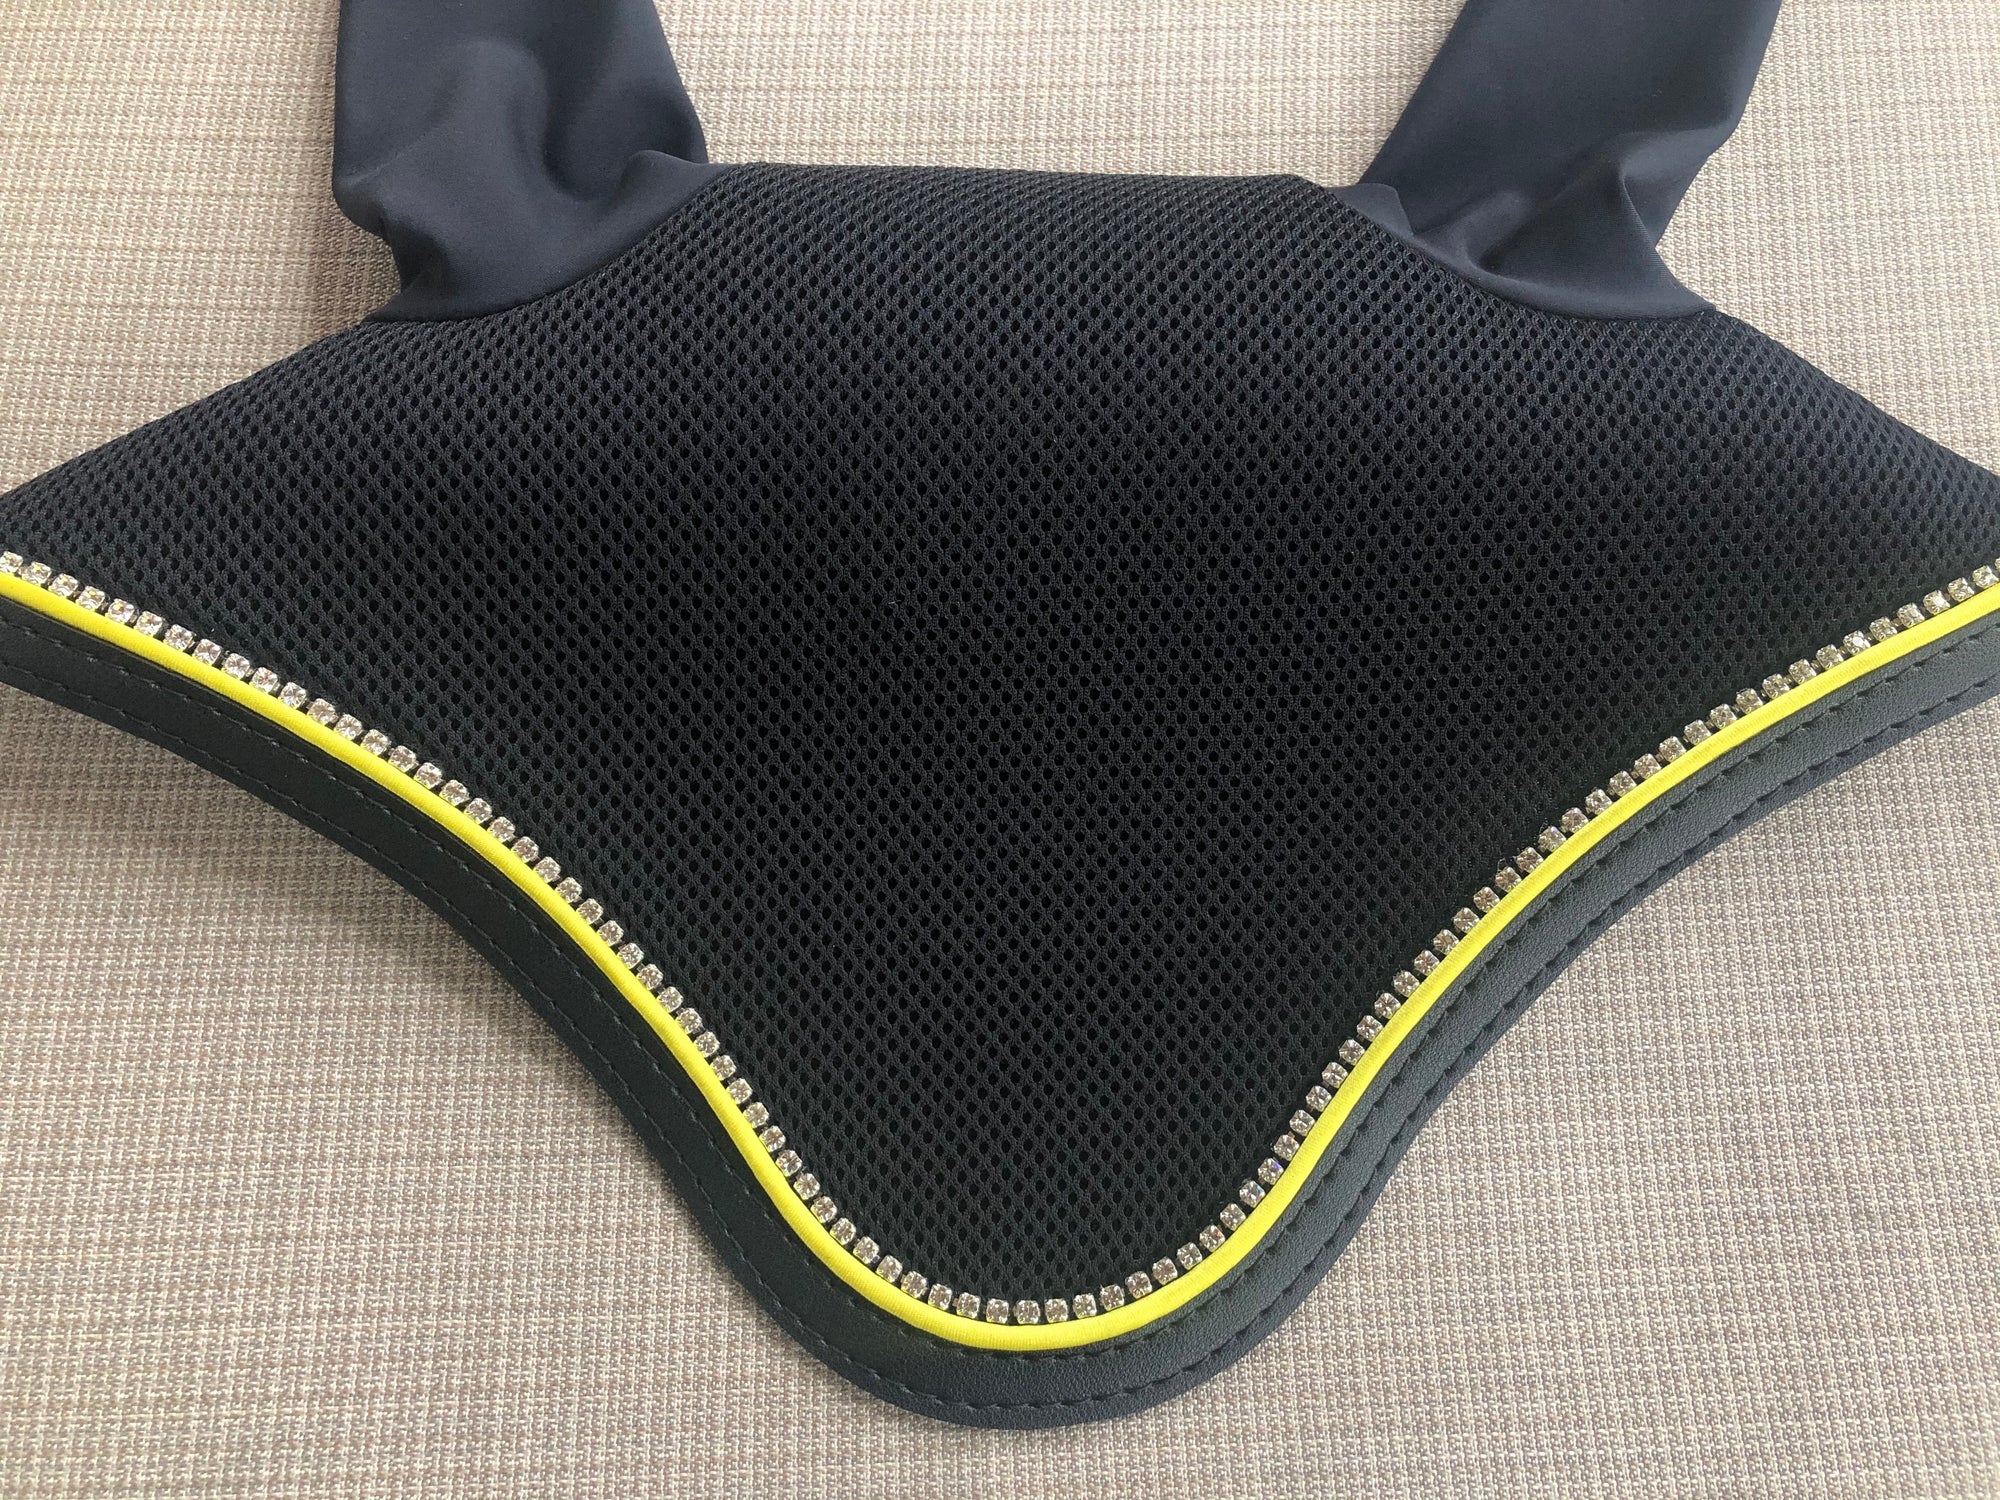 Round Black Bonnet with yellow piping and Crystals